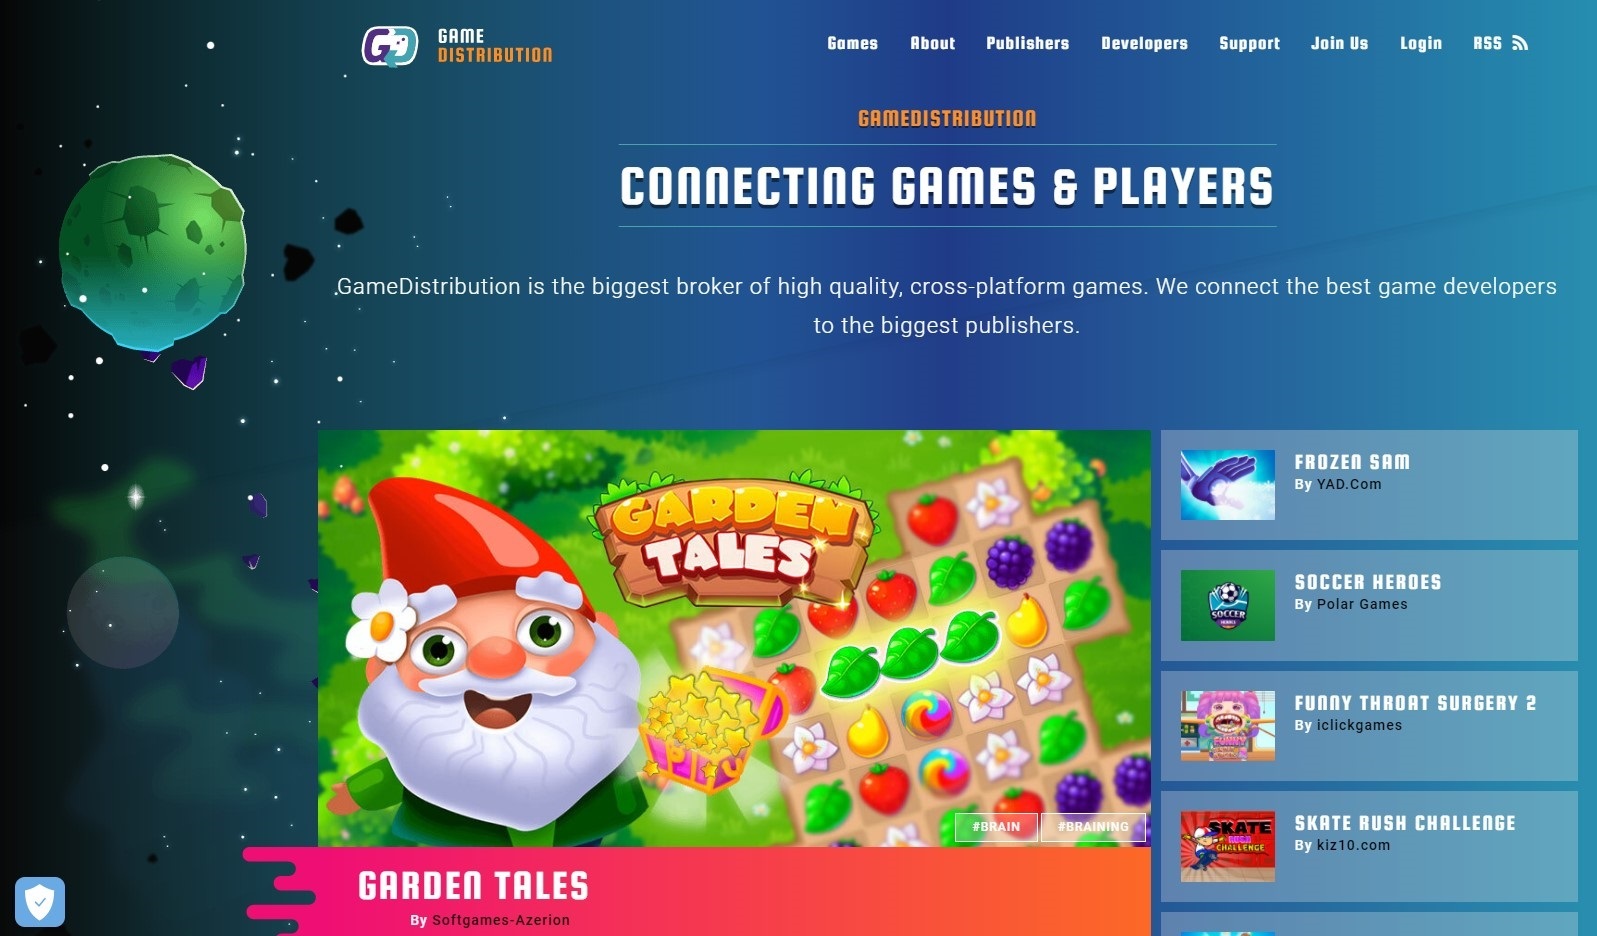 8 Money-making SDKs For Games On The Cocos Store